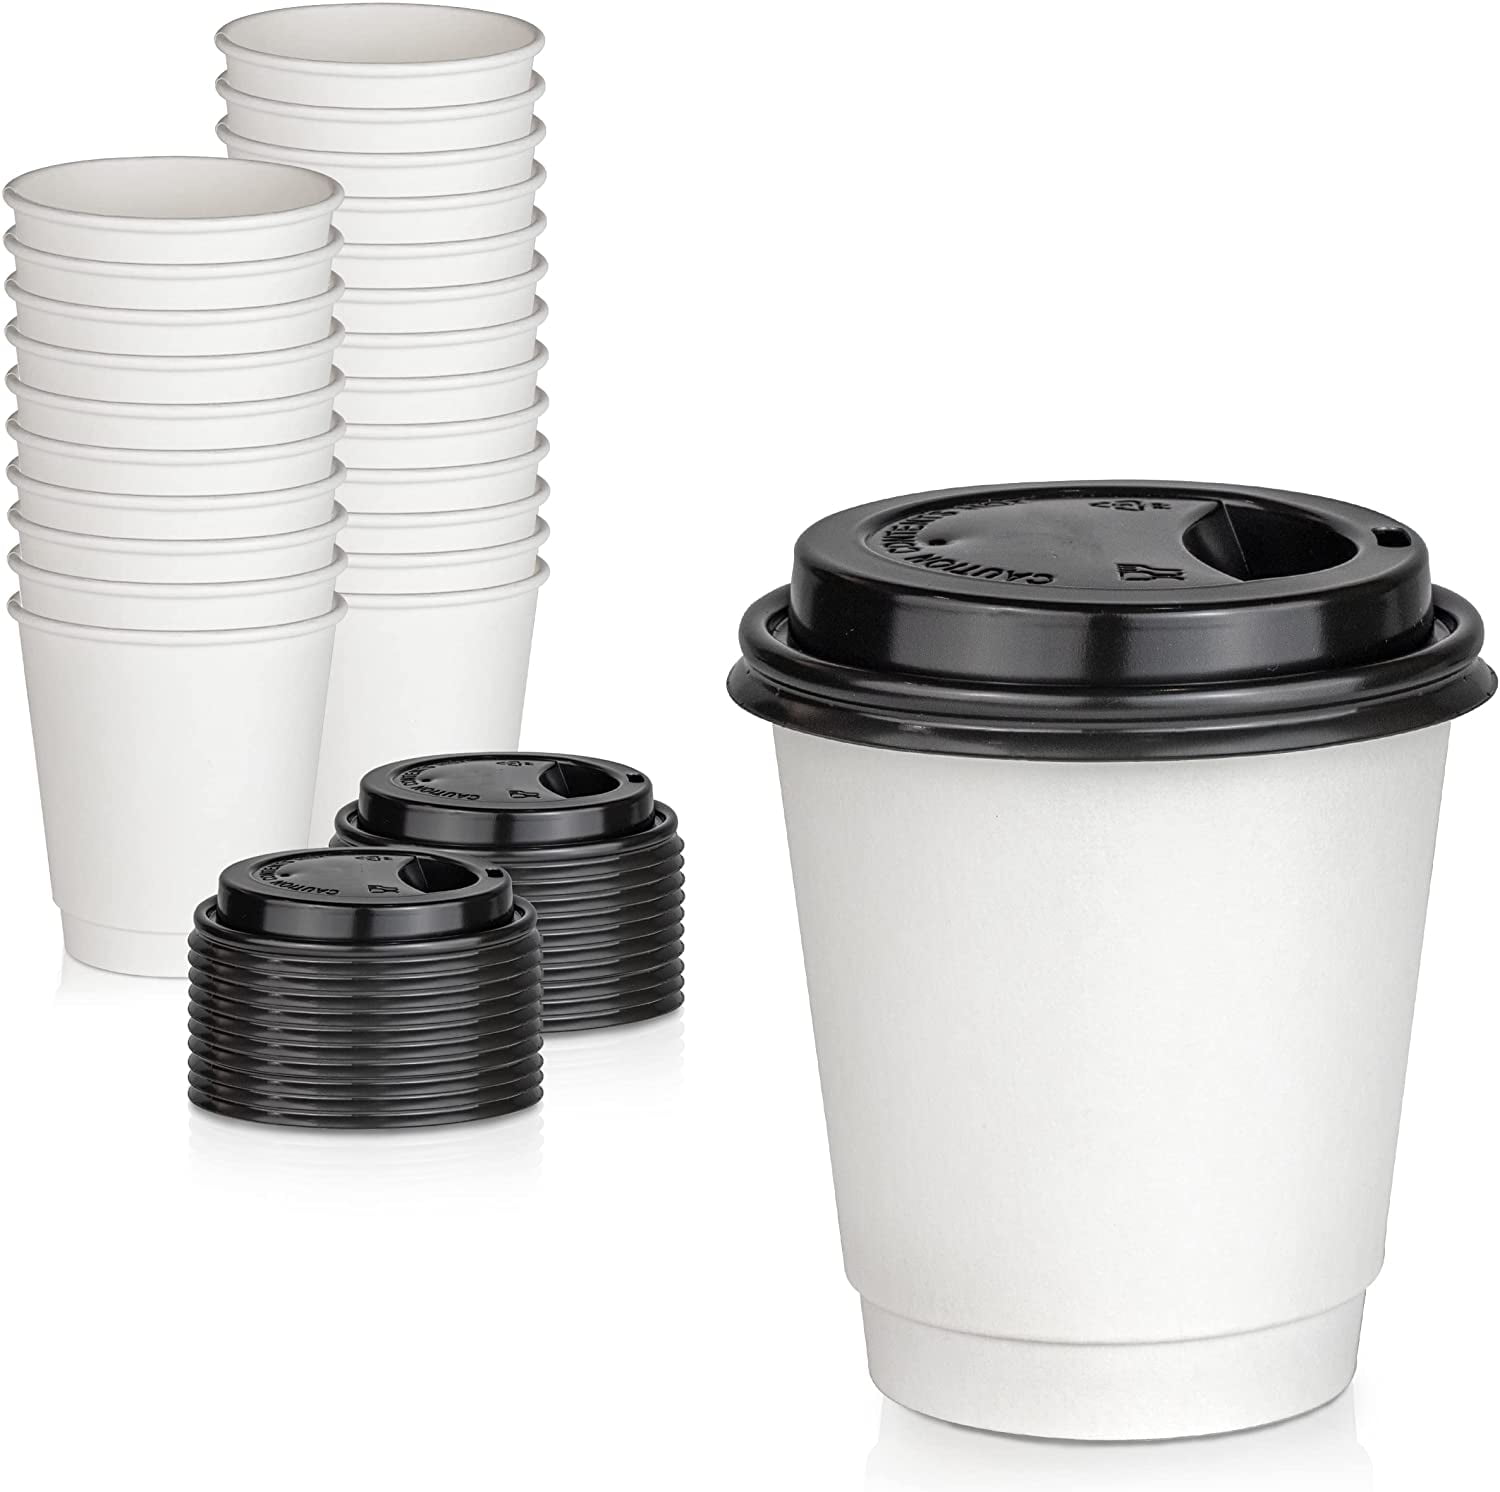 16oz USA SELLER 50 Pack Quality Disposable Paper Hot Coffee Tea Cups 